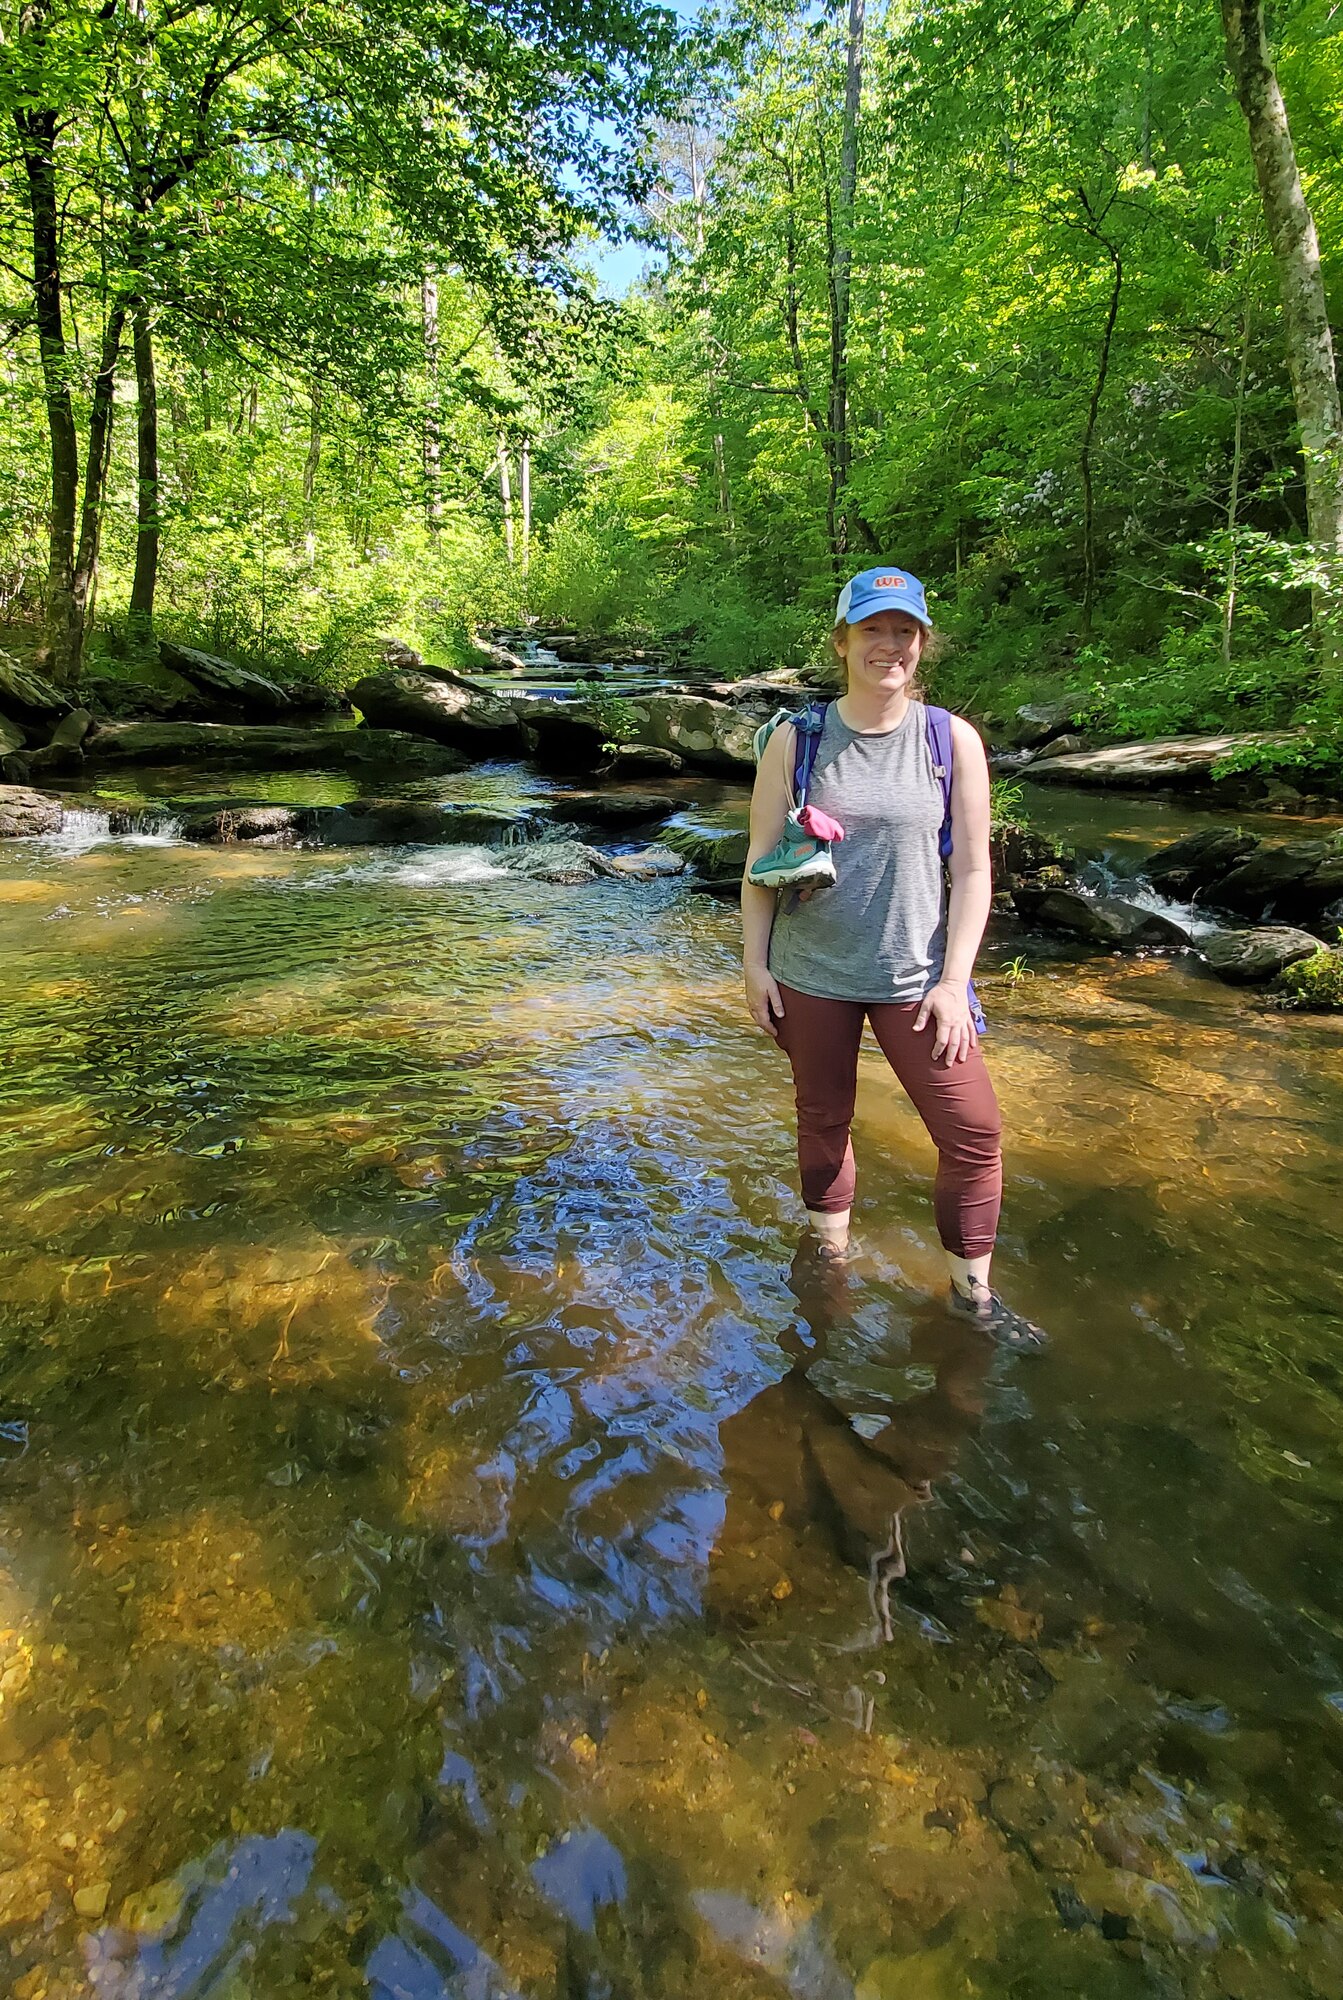 Shannon Allen, the National Environmental Policy Act, Natural and Cultural Resources Planner for Arnold Air Force Base, crosses the Chinnabee Creek while hiking part of the Pinhoti Trail in Alabama during the Make-A-Wish Foundation Alabama Trailblaze Challenge, May 1, 2021. (Courtesy photo)